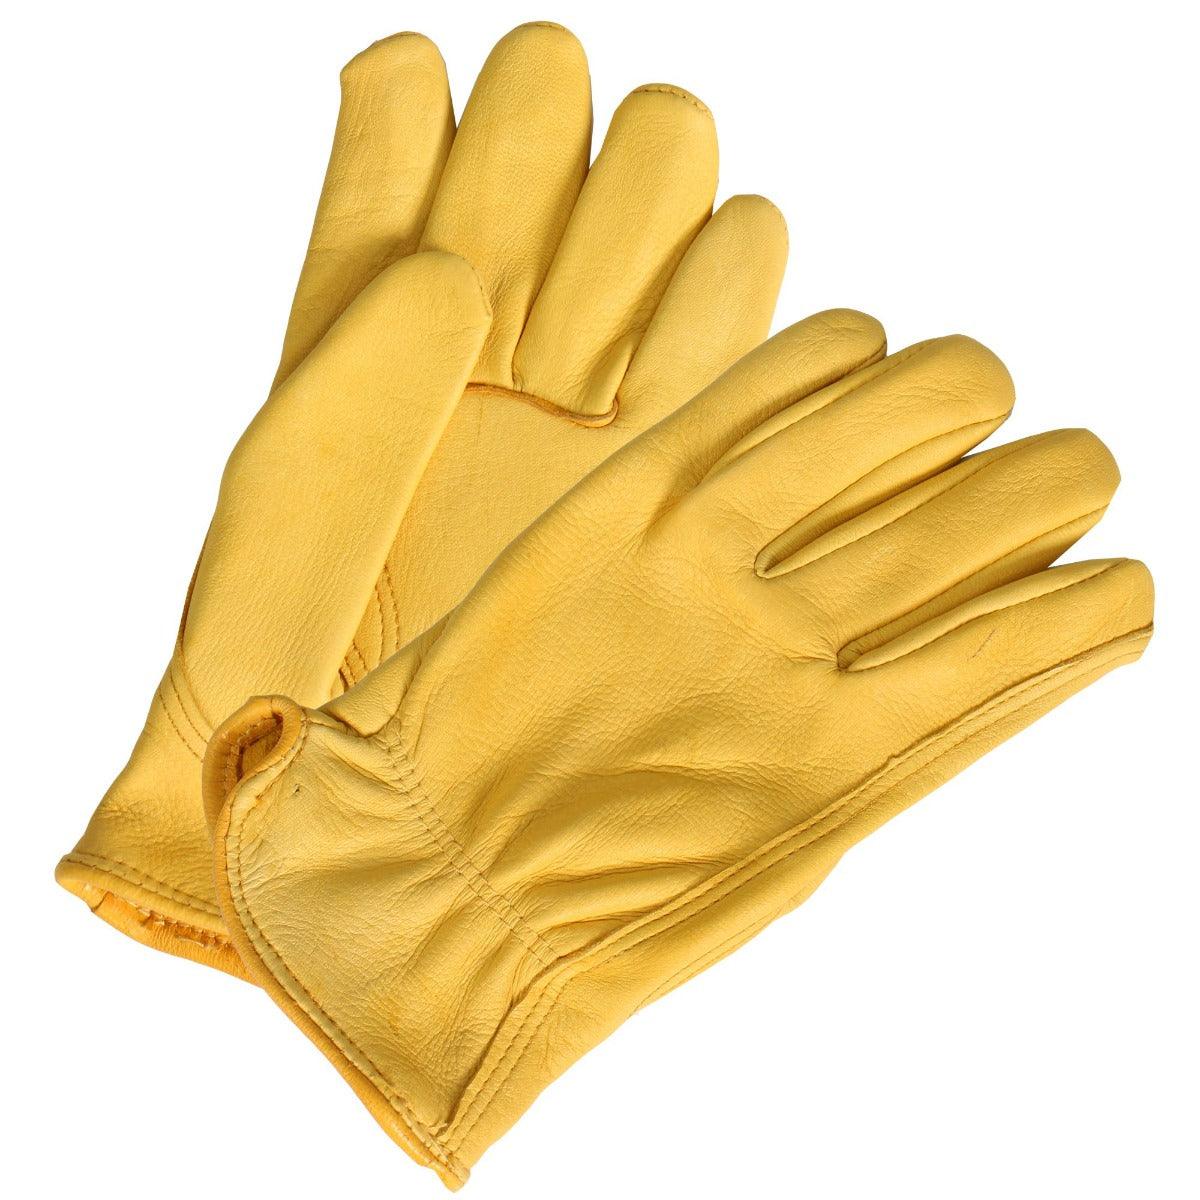 Hot Leathers Gold Deerskin Leather Driving Gloves - American Legend Rider